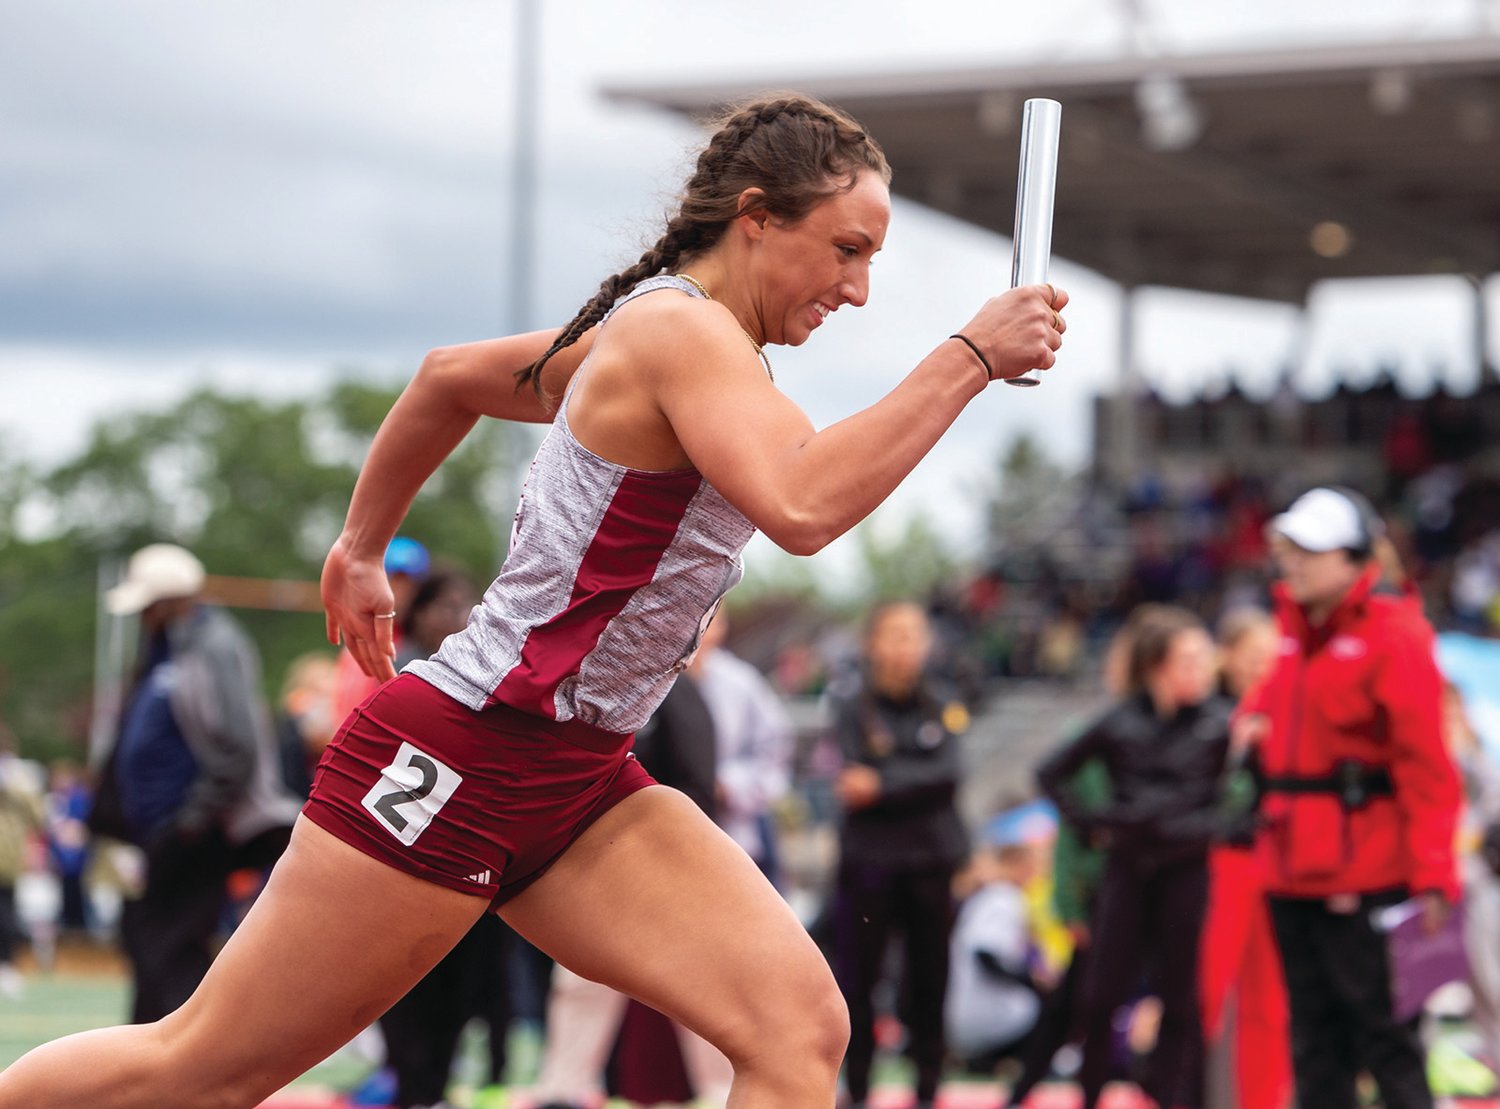 W.F. West's Savanna Bolivar strides off her marks at the start of a 2A Girls 4x100 Prelim at the 4A/3A/2A State Track and Field Championships on Friday, May 27, 2022, at Mount Tahoma High School in Tacoma. (Joshua Hart/For The Chronicle)